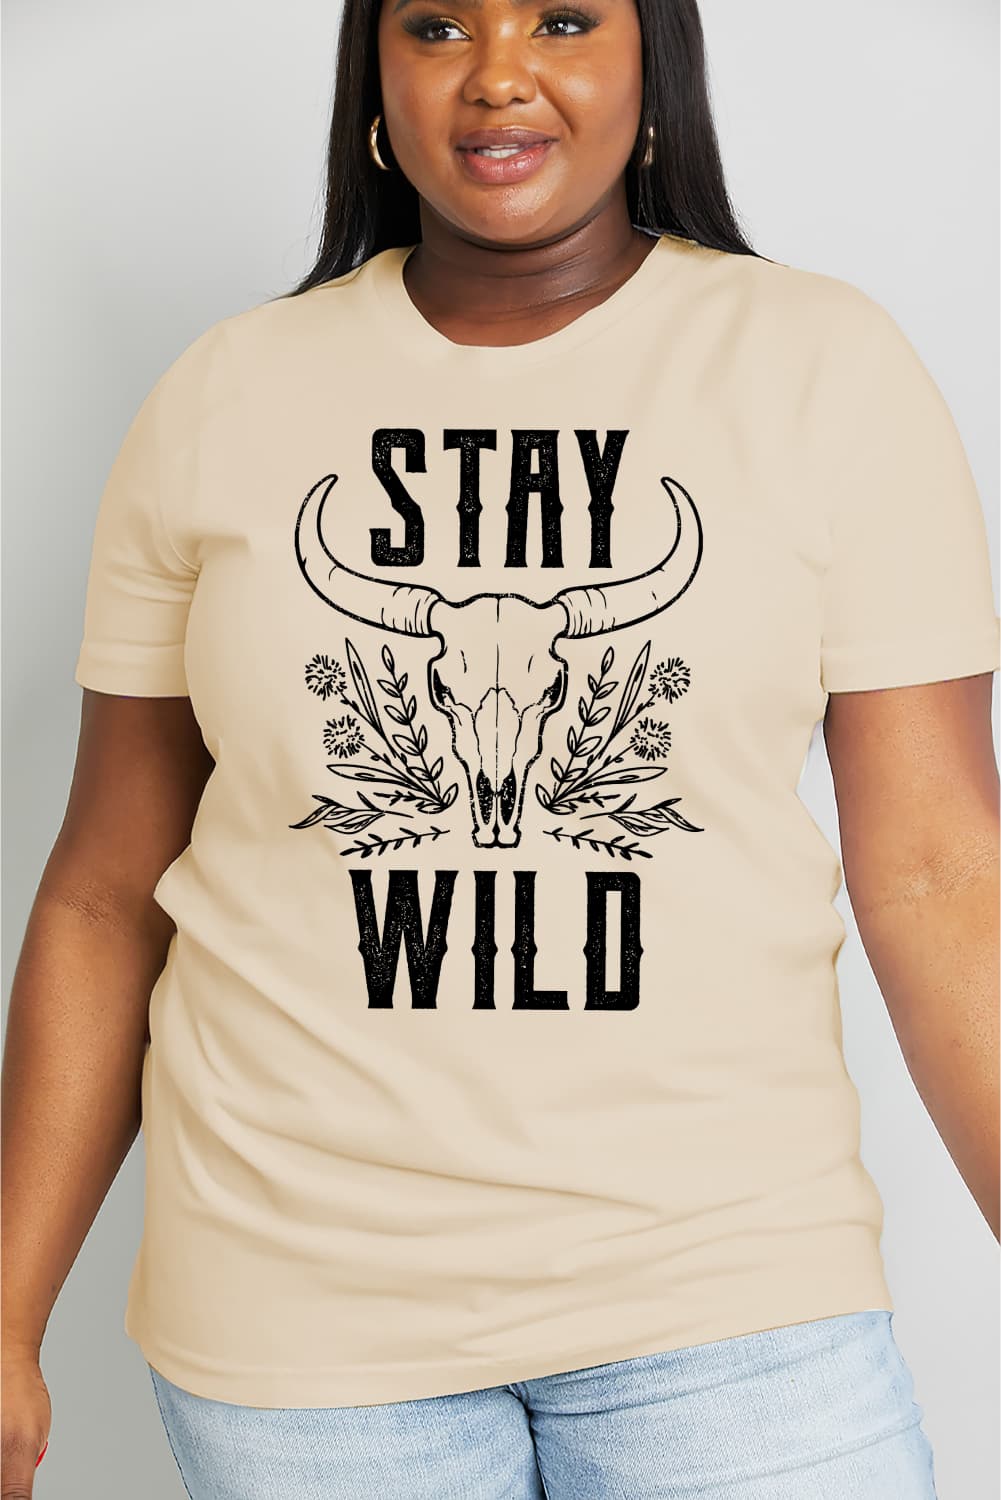 Simply Love Full Size STAY WILD Graphic Cotton Tee